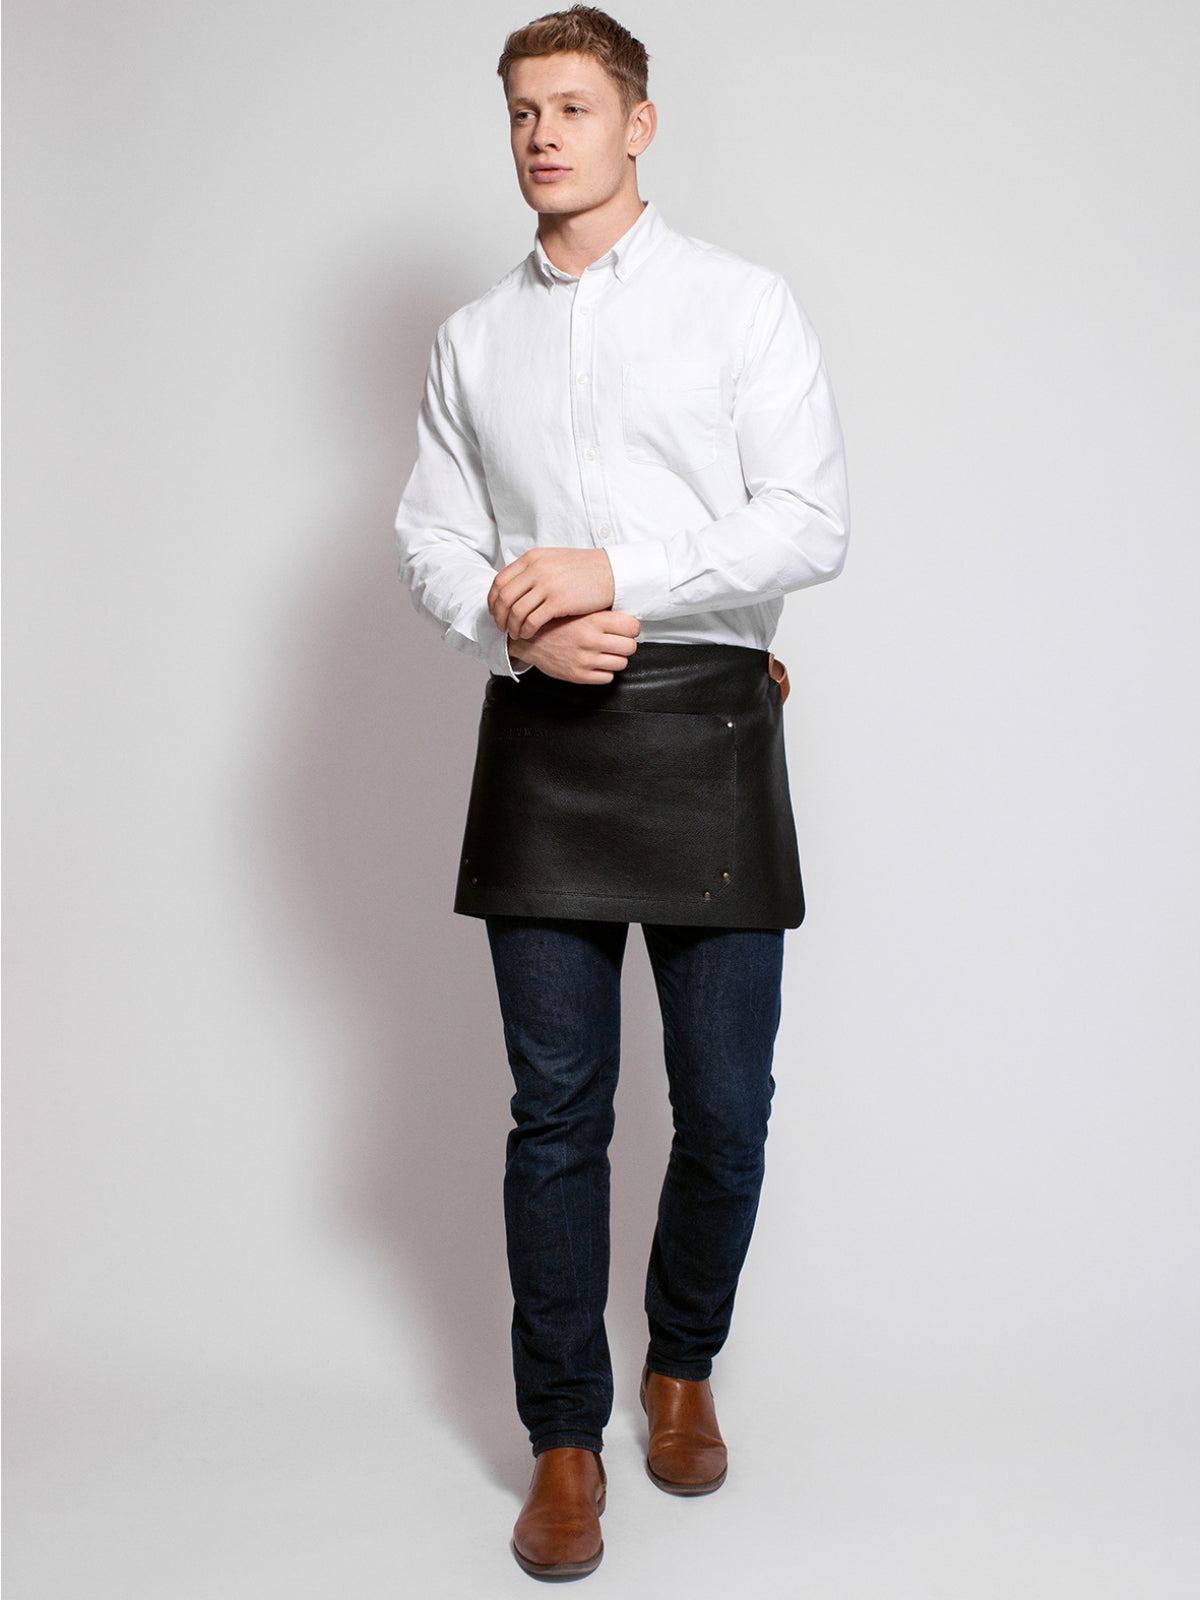 Leather Waist Apron Deluxe Black by STW -  ChefsCotton